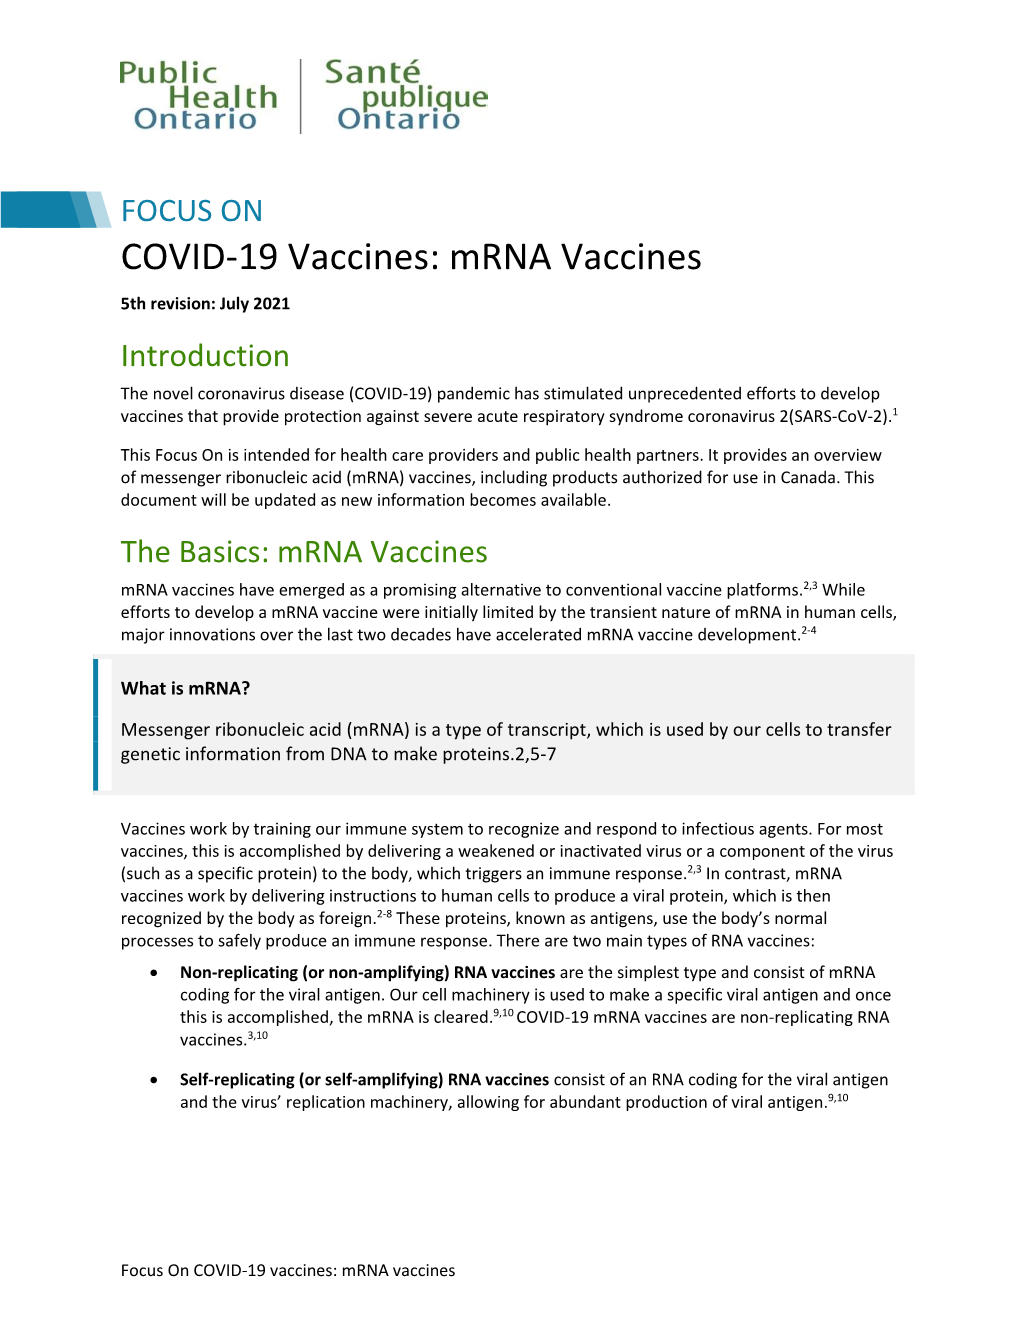 Focus on COVID-19 Vaccines: Mrna Vaccines Key Messages: COVID-19 Mrna Vaccines